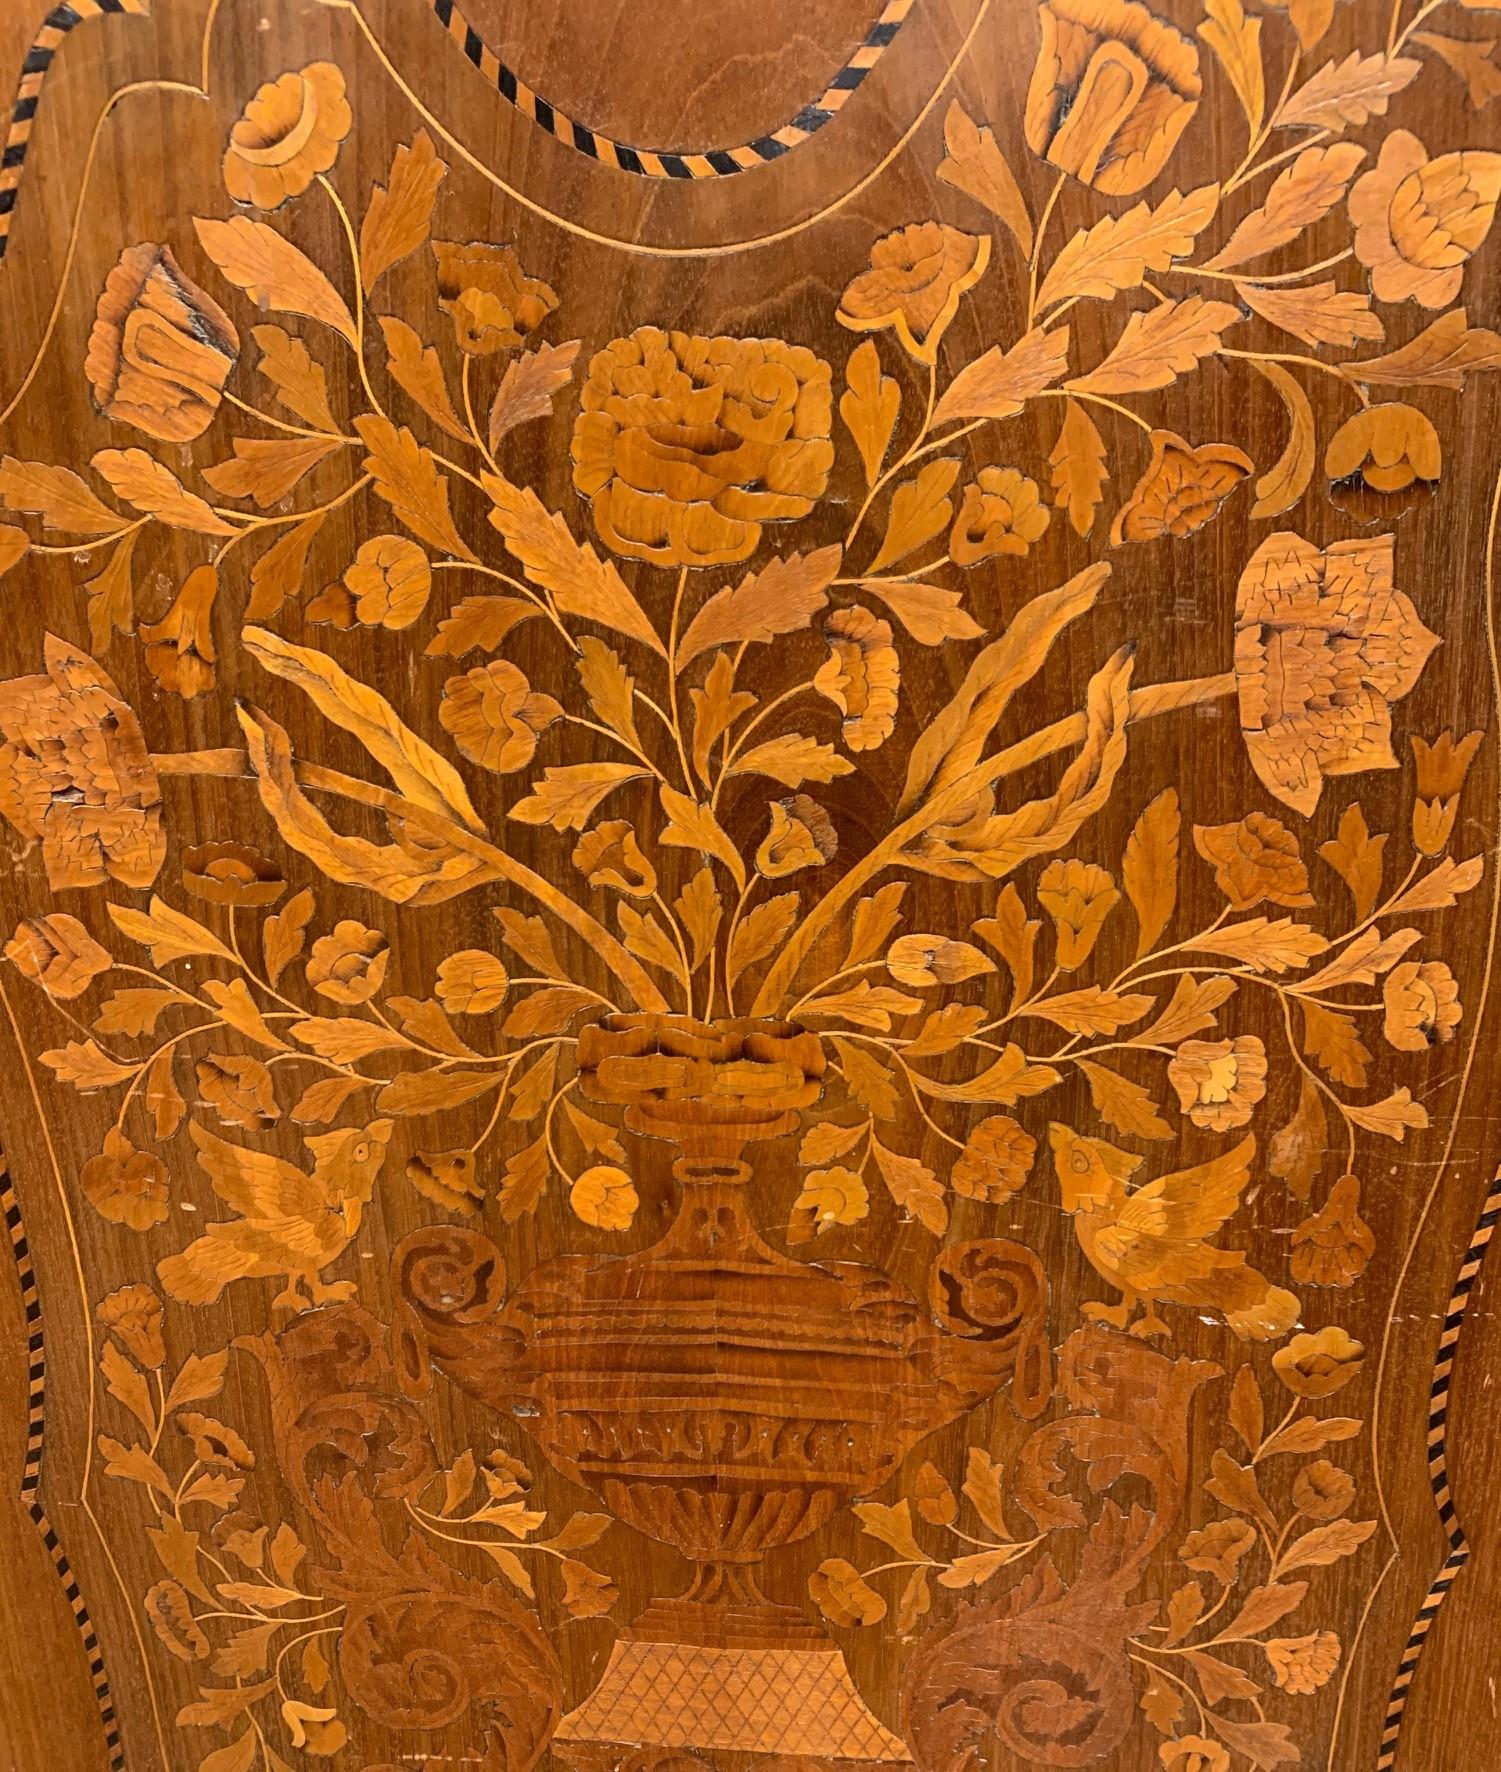 Wonderful 19th century pair of Dutch walnut wall panels with contoured crests. Featuring fine marquetry inlays of olivewood, pearwood, and satinwood depicting elaborate floral arrangements and classical urns,

circa 1890.